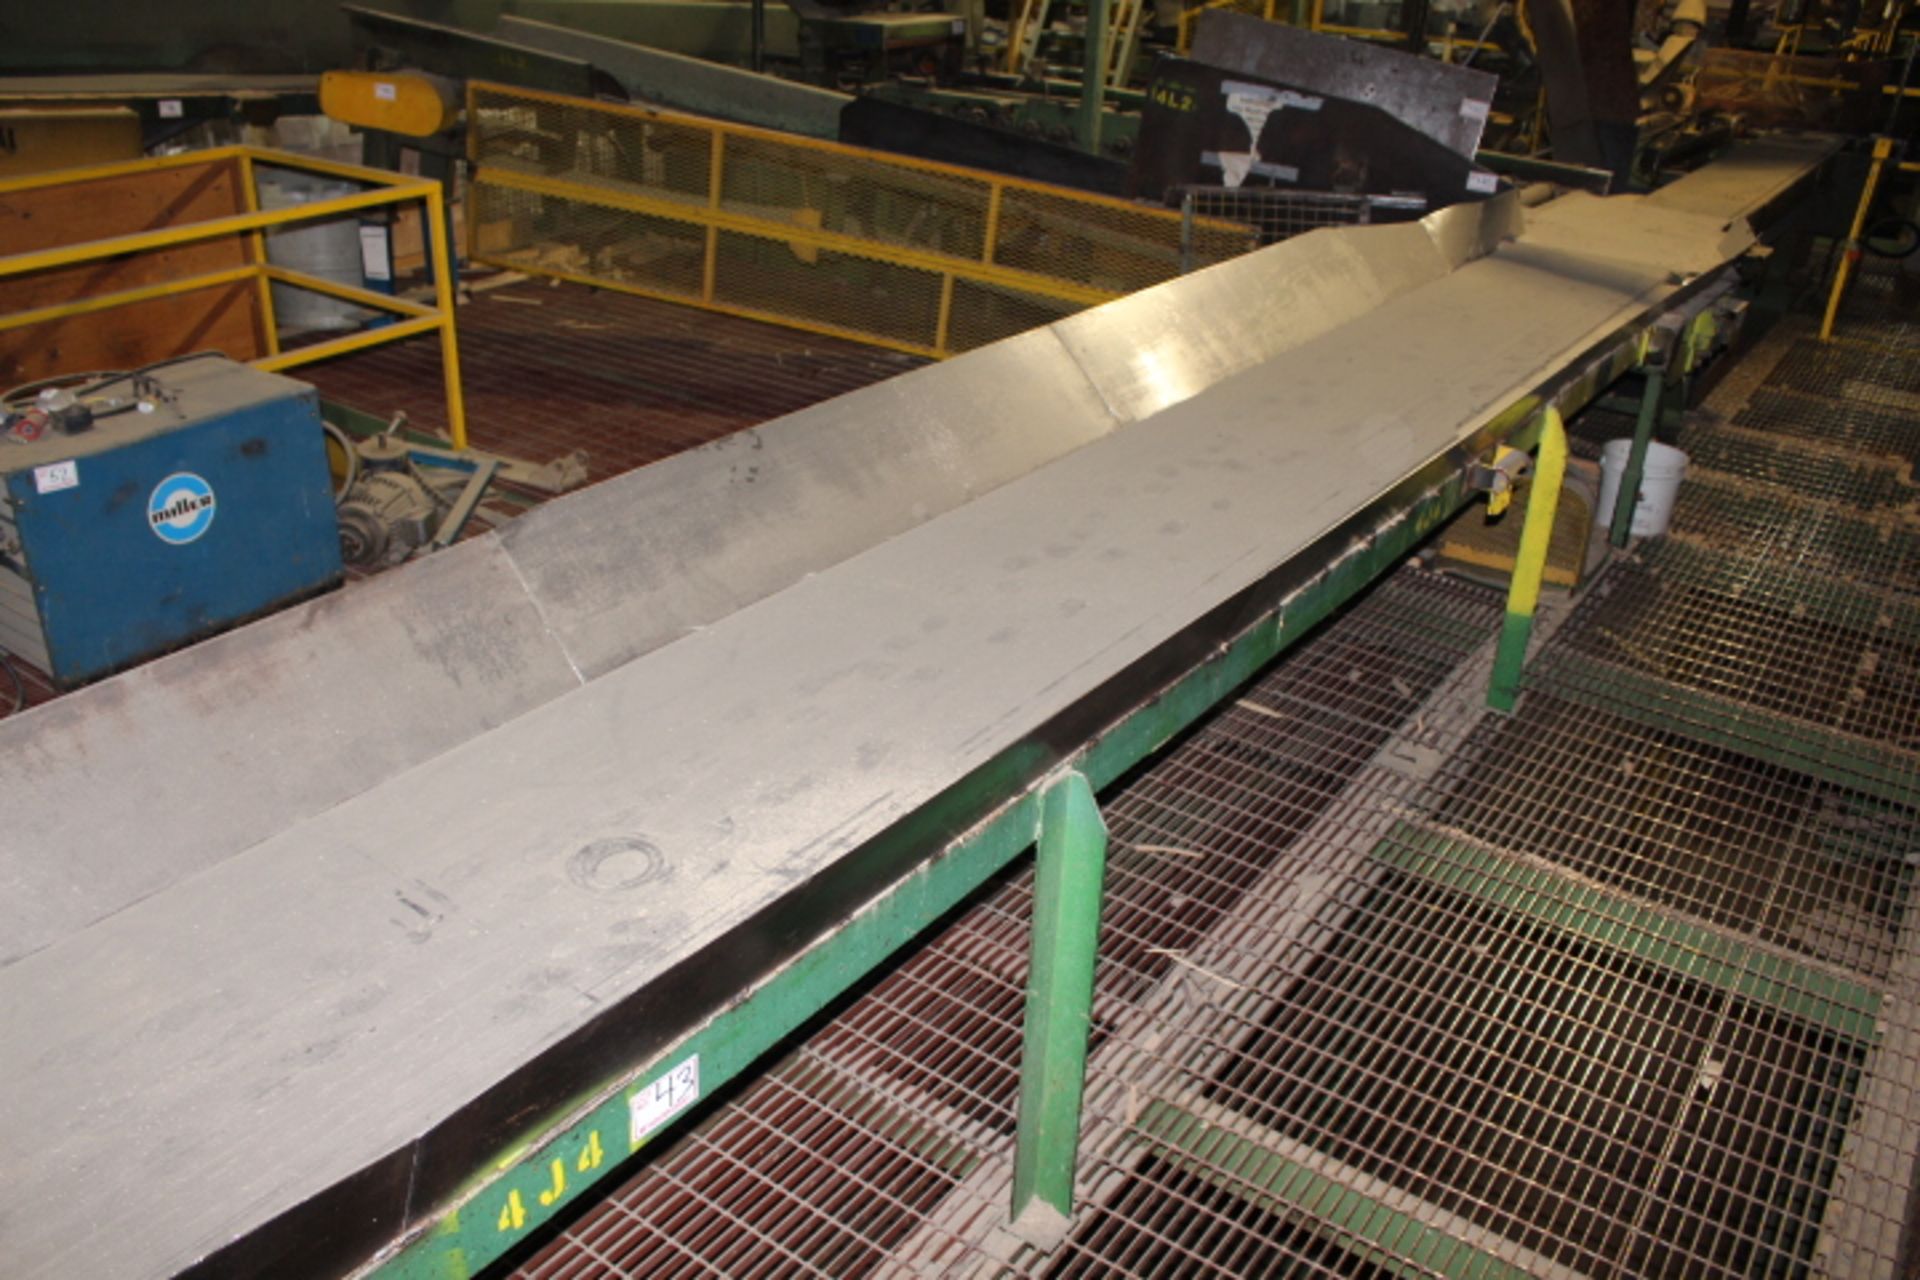 24" X 27' BELT CONVEYOR, OUTFEED FROM CONVEYOR 4J3 AND MAN SORTING STATION, ASSET NO. 4J4, MOTOR &